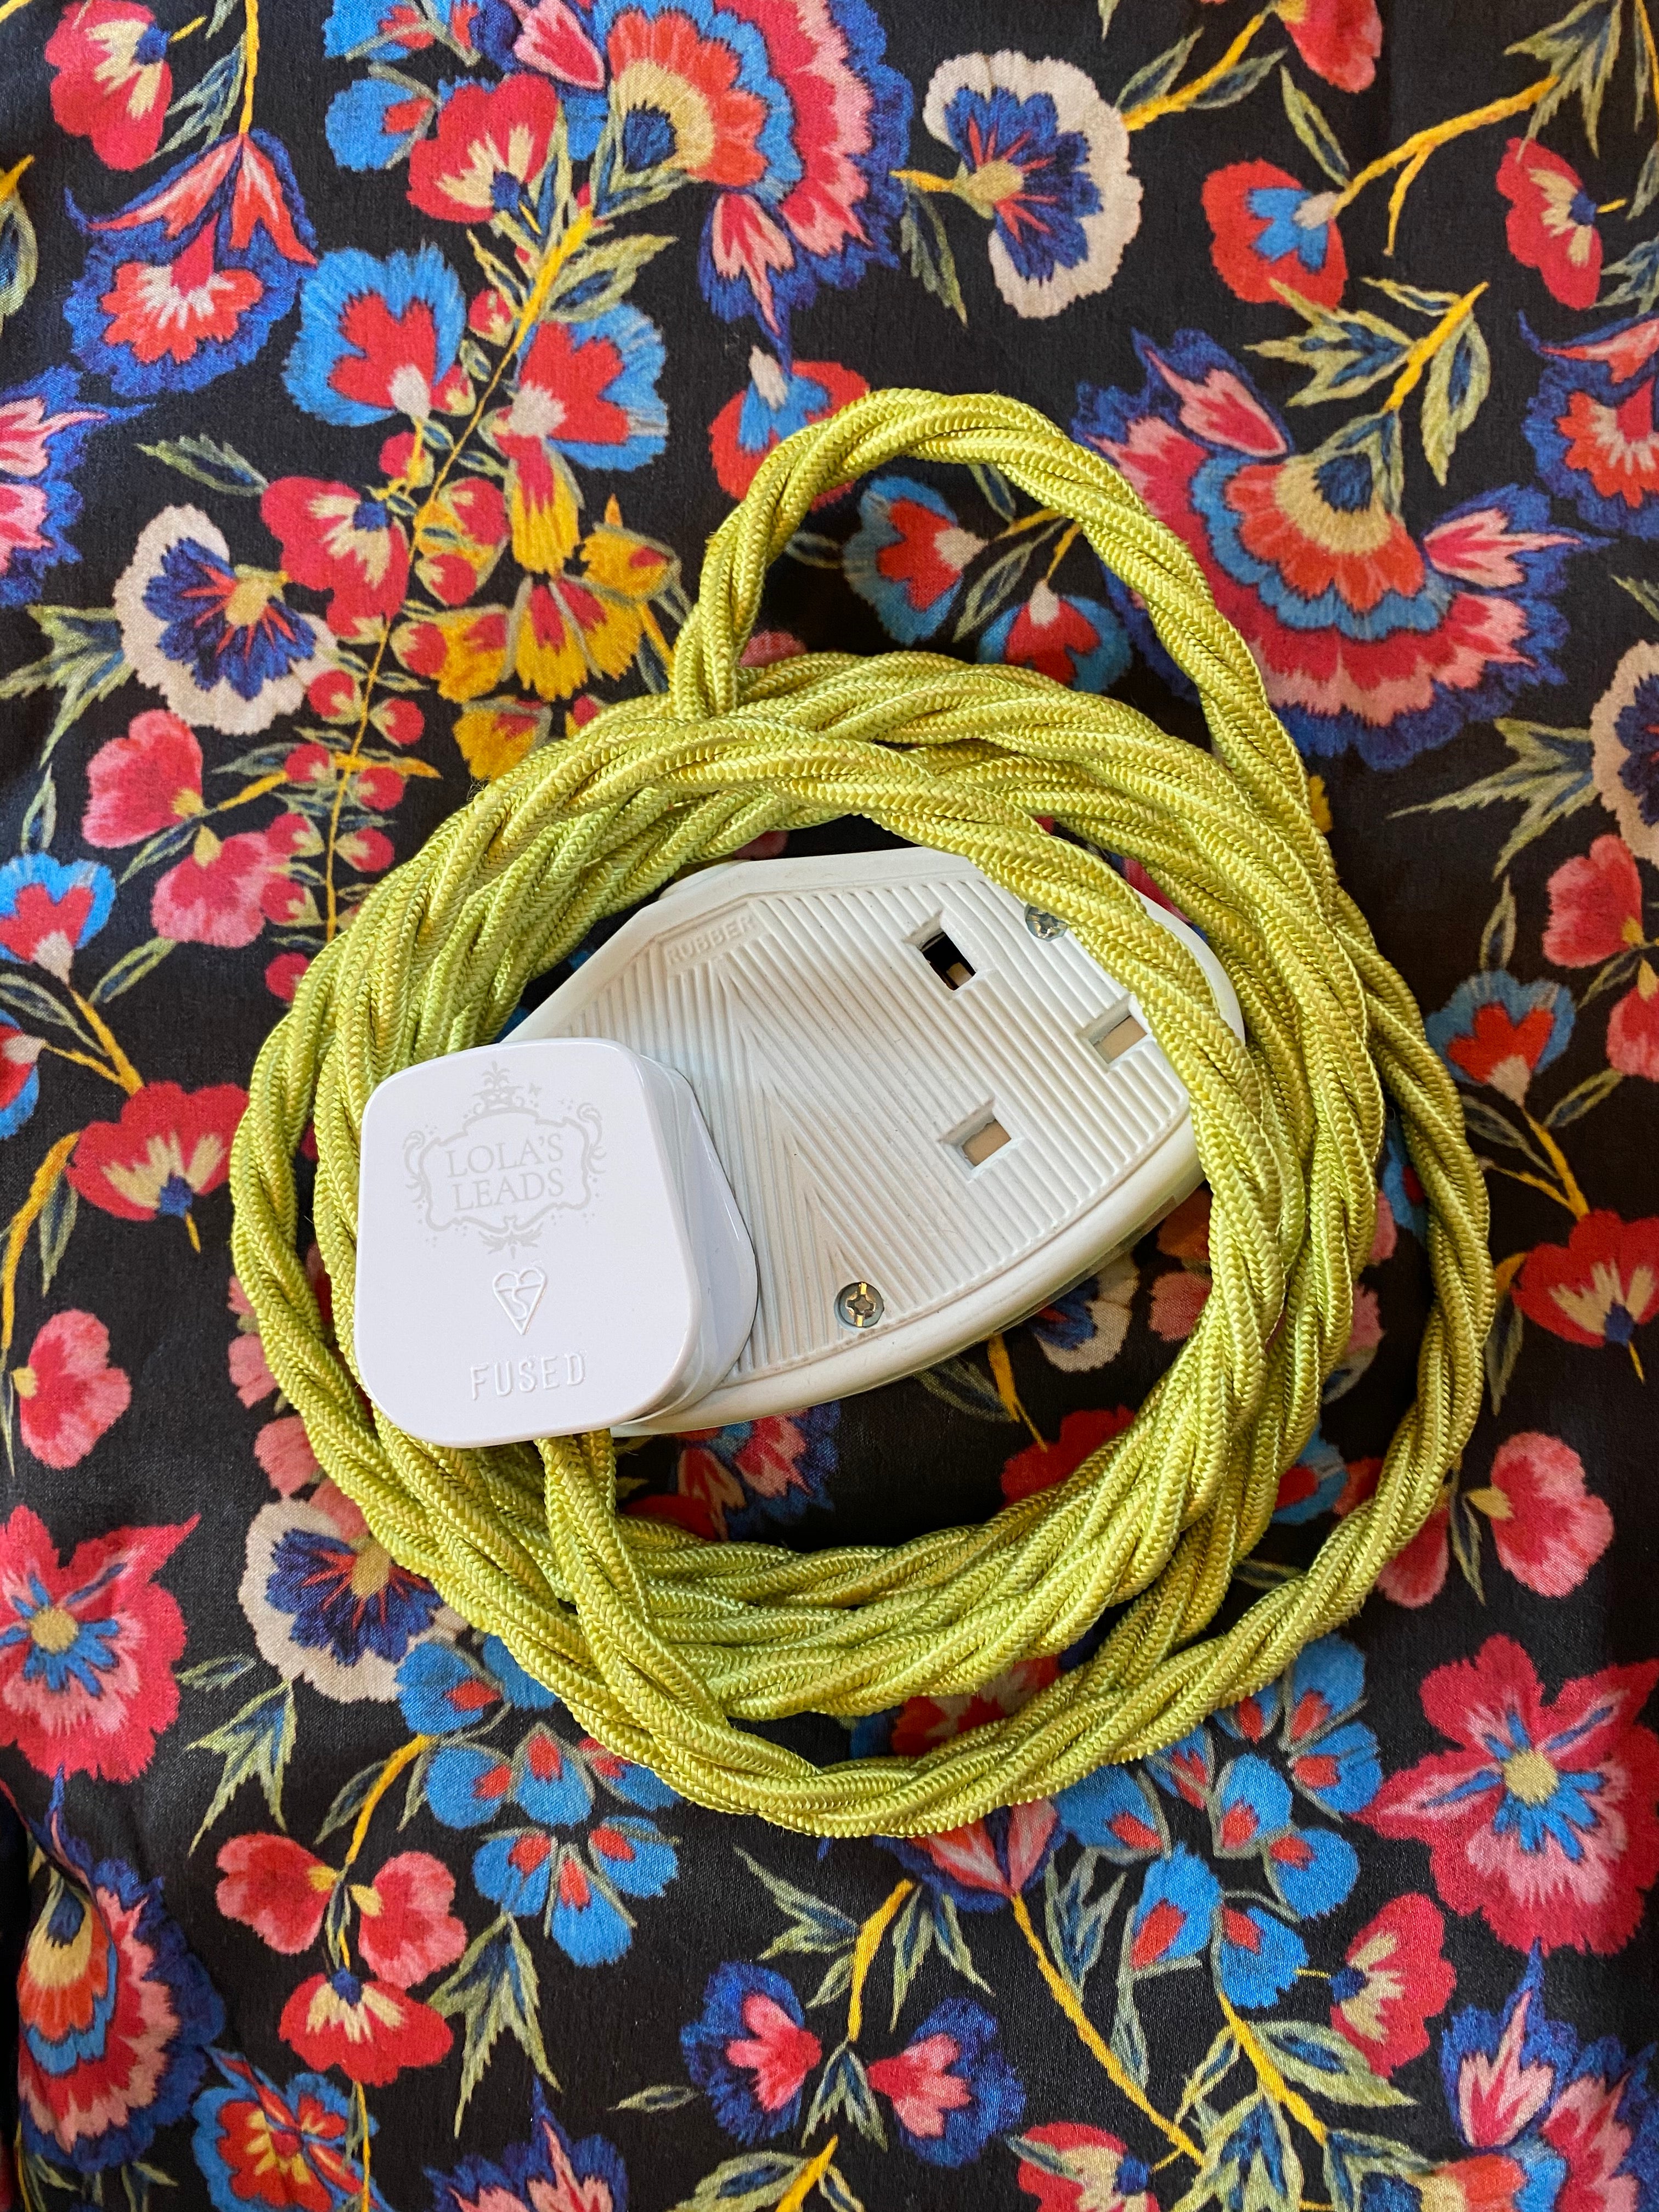 Lola's Leads - Chartreuse & White 2m